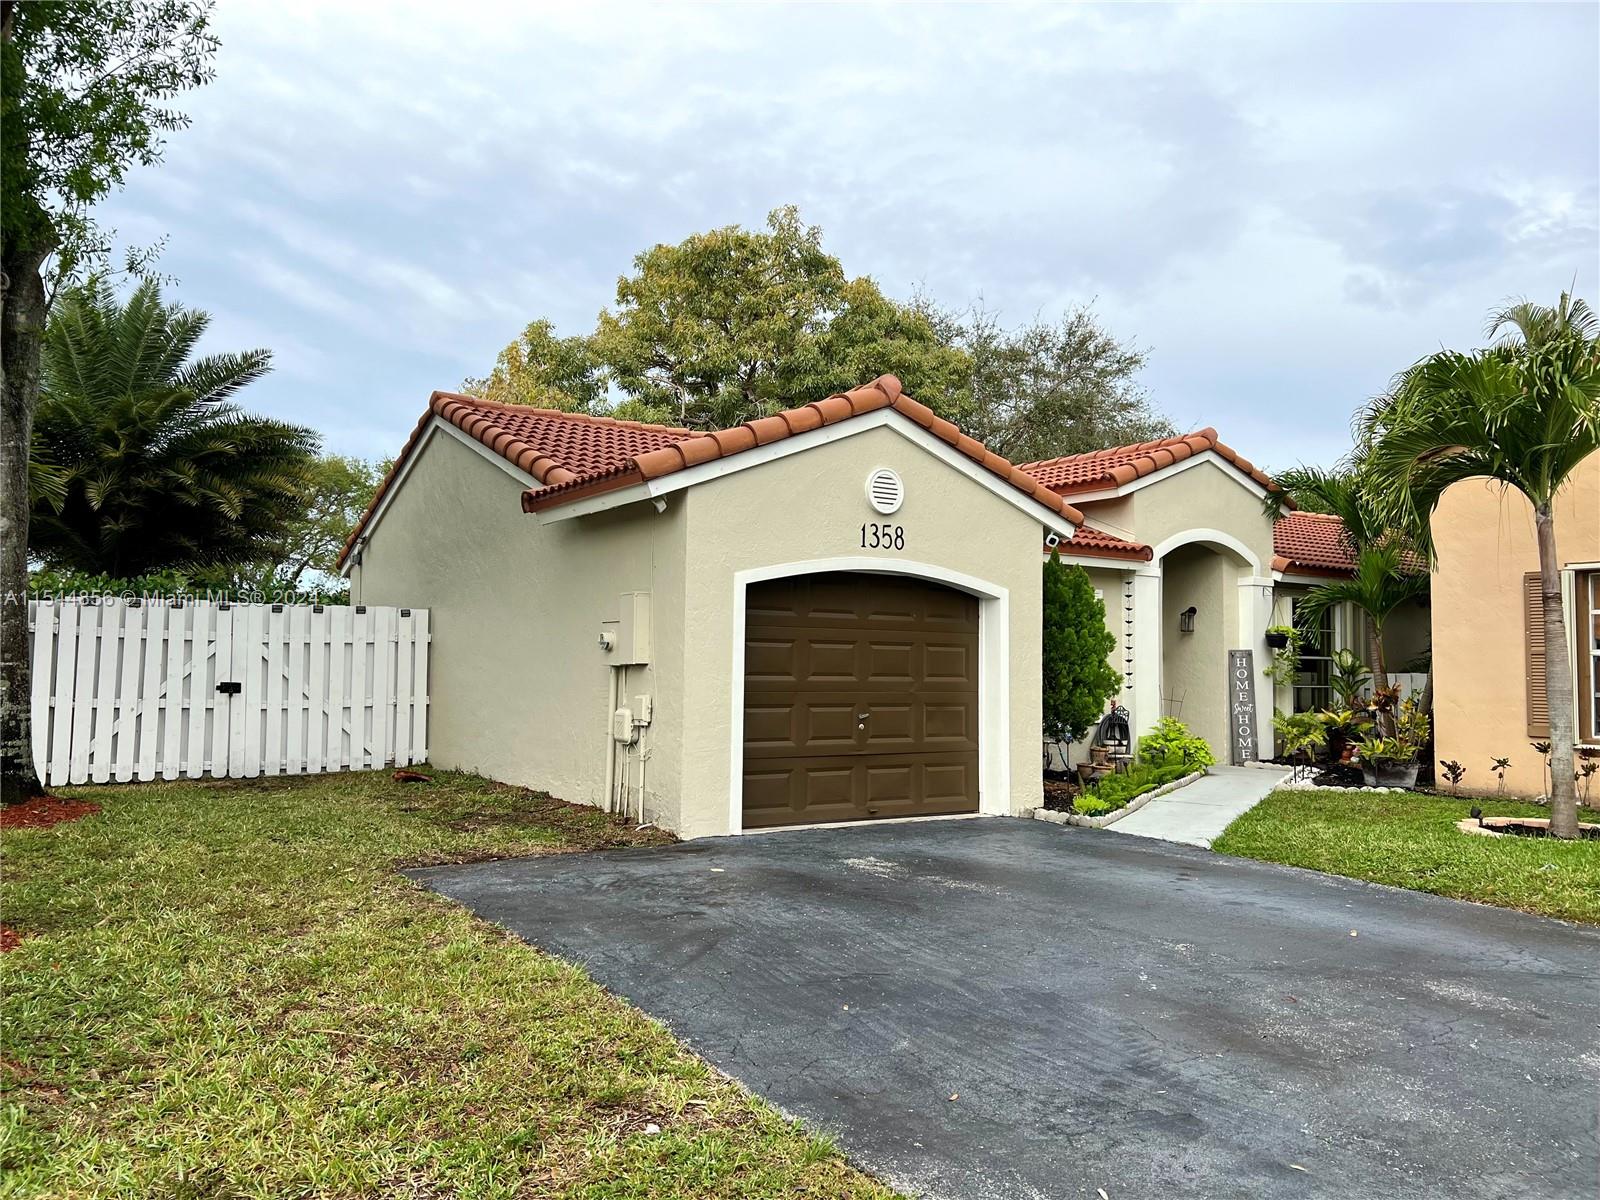 1358 NW 125th Ter, Sunrise, Florida 33323, 3 Bedrooms Bedrooms, ,2 BathroomsBathrooms,Residential,For Sale,1358 NW 125th Ter,A11544856